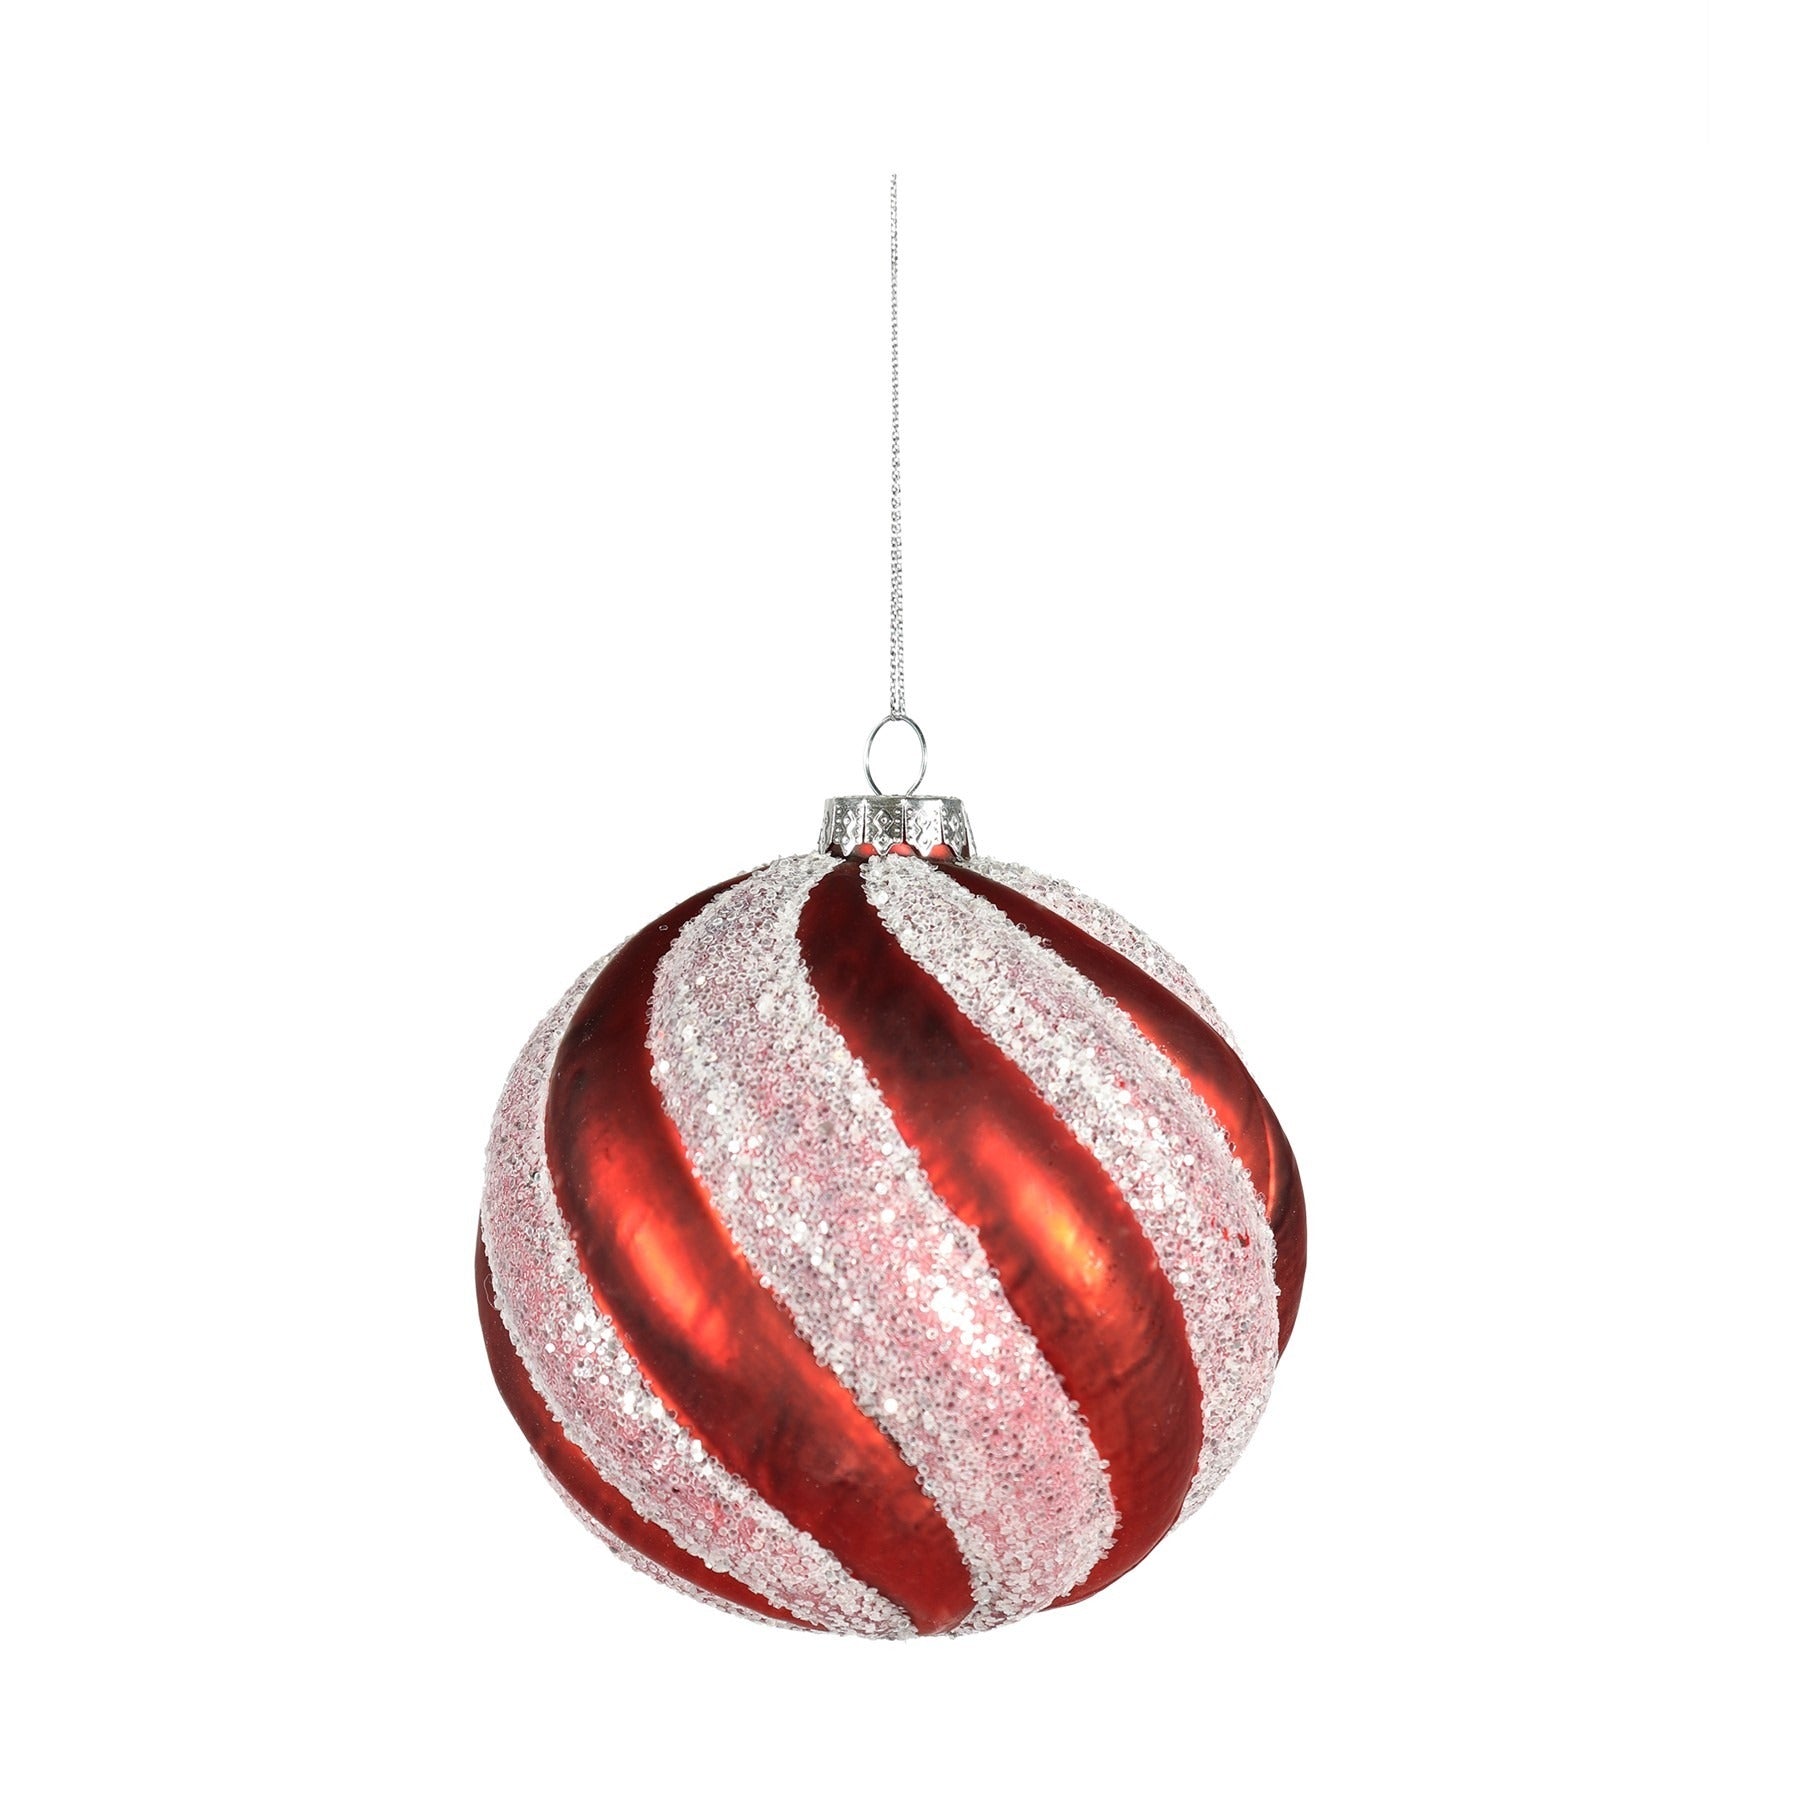 View Red and White Glass Bauble with Swirl Pattern Dia10cm information